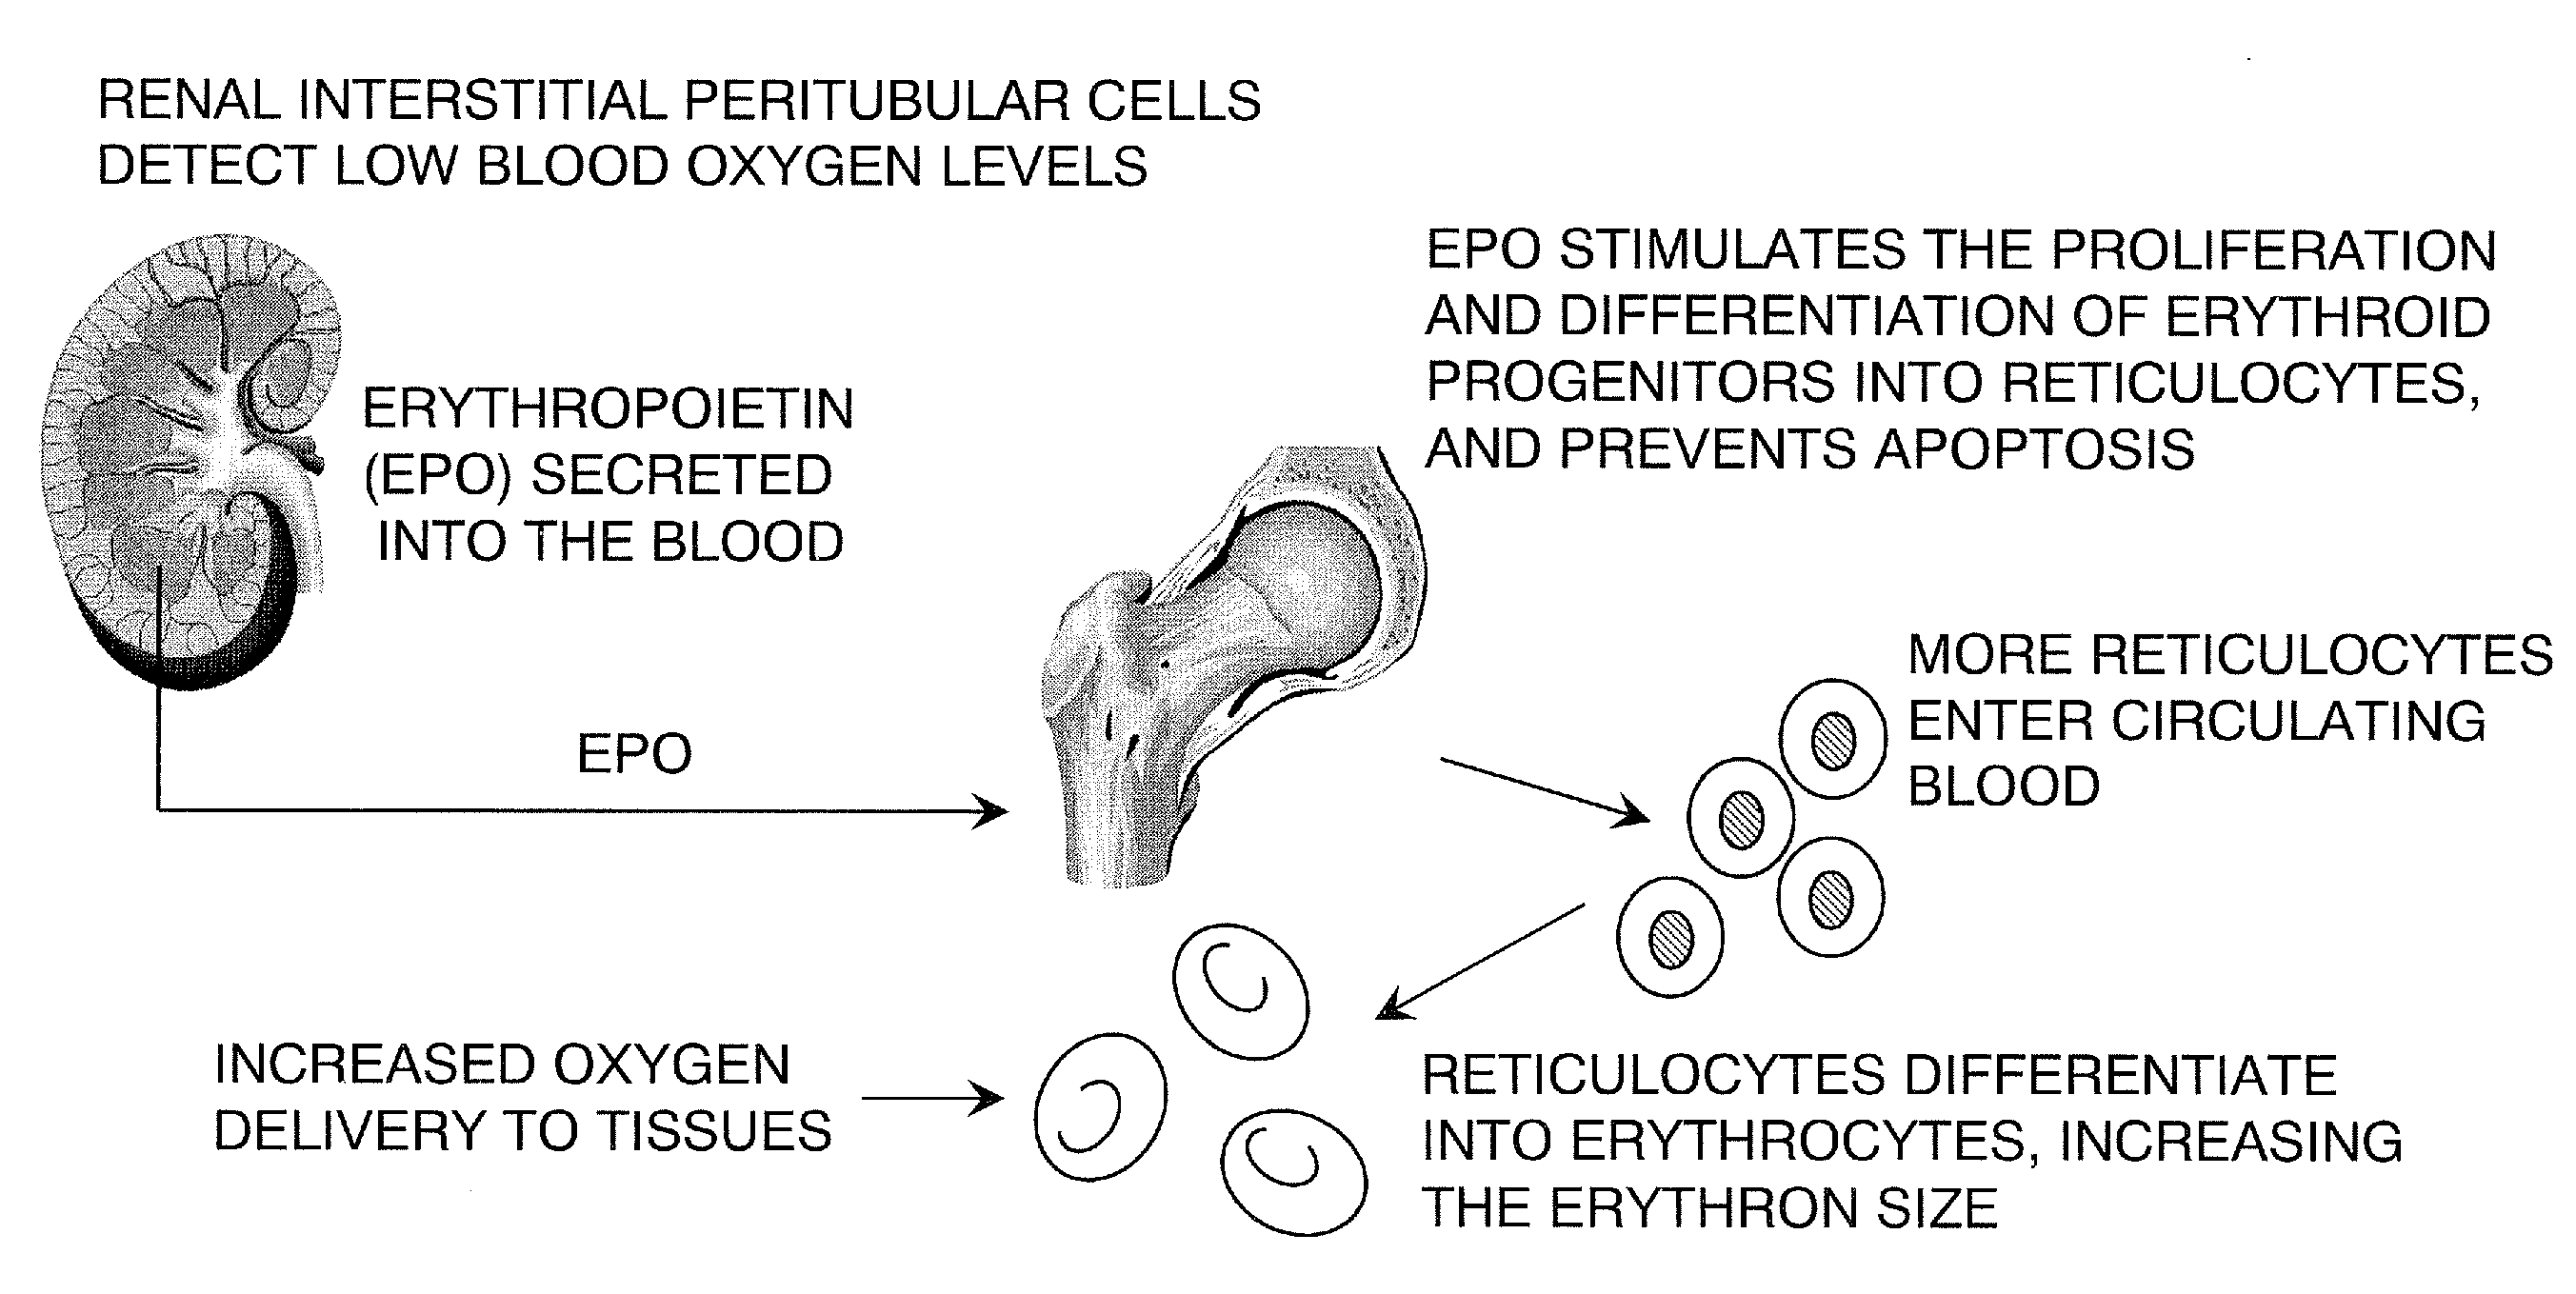 Kidney structures and methods of forming the same